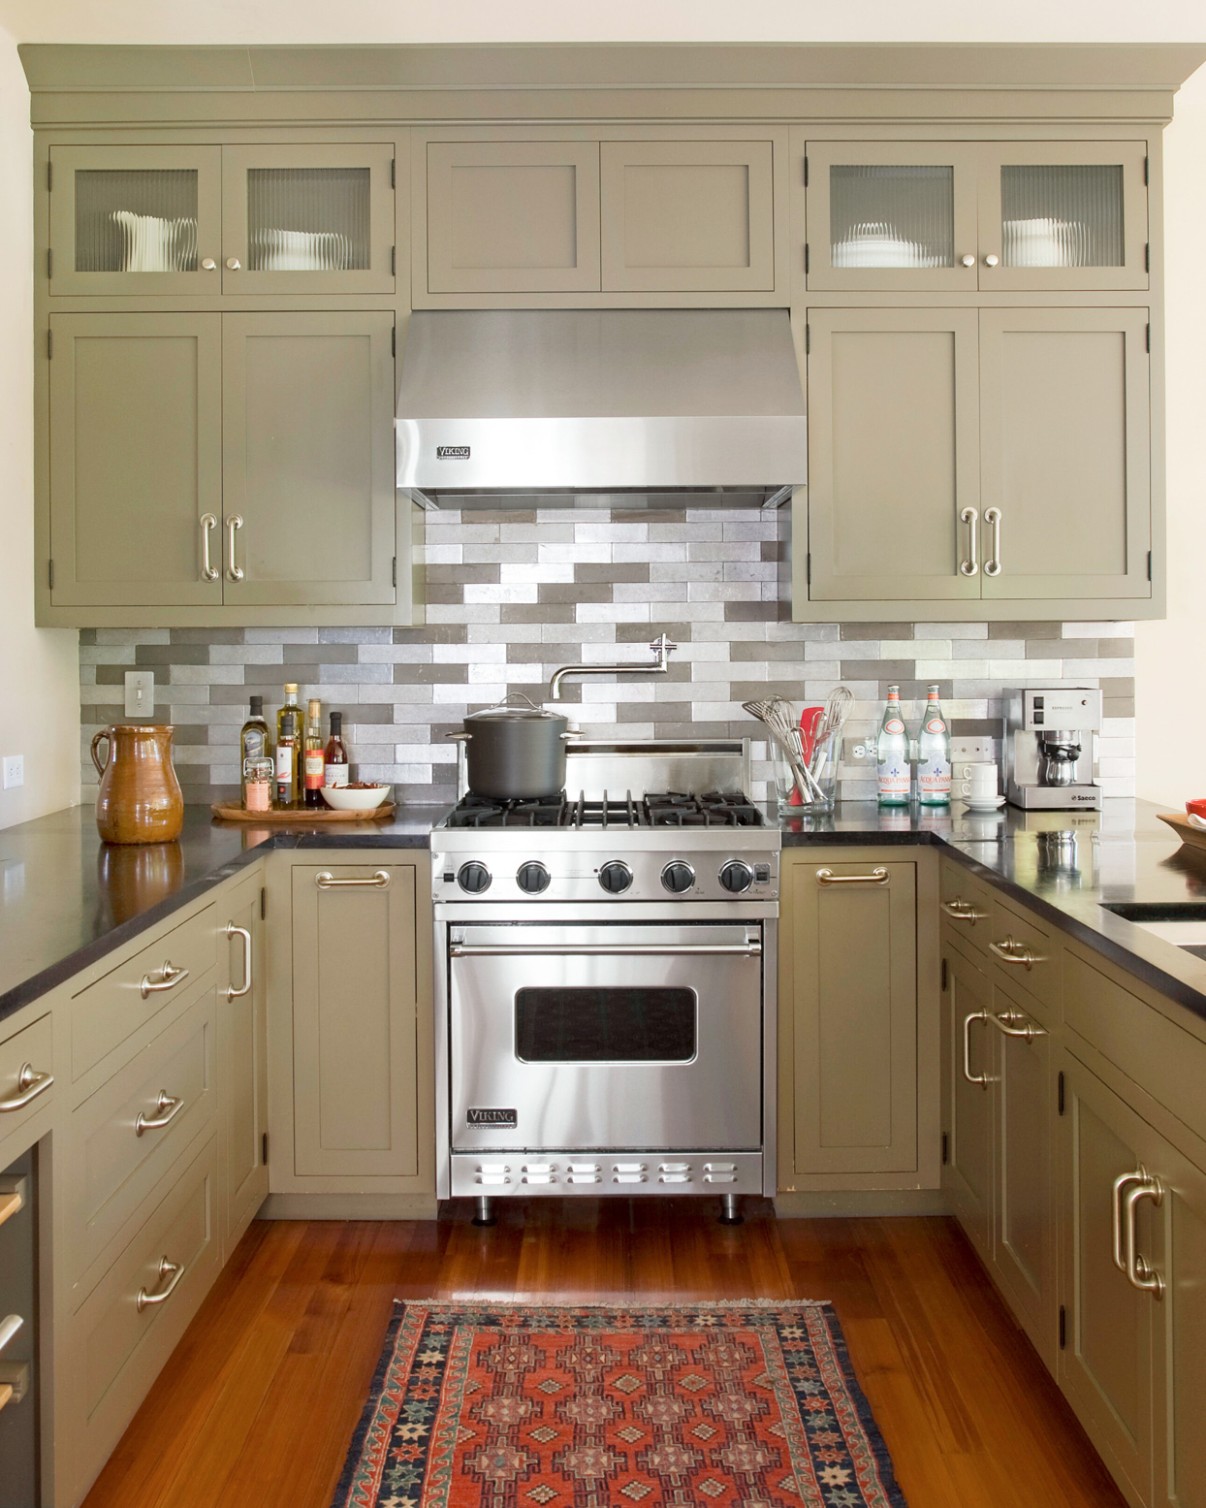 6 Small Kitchen Decor Ideas to Make a Sizzling Statement  Better